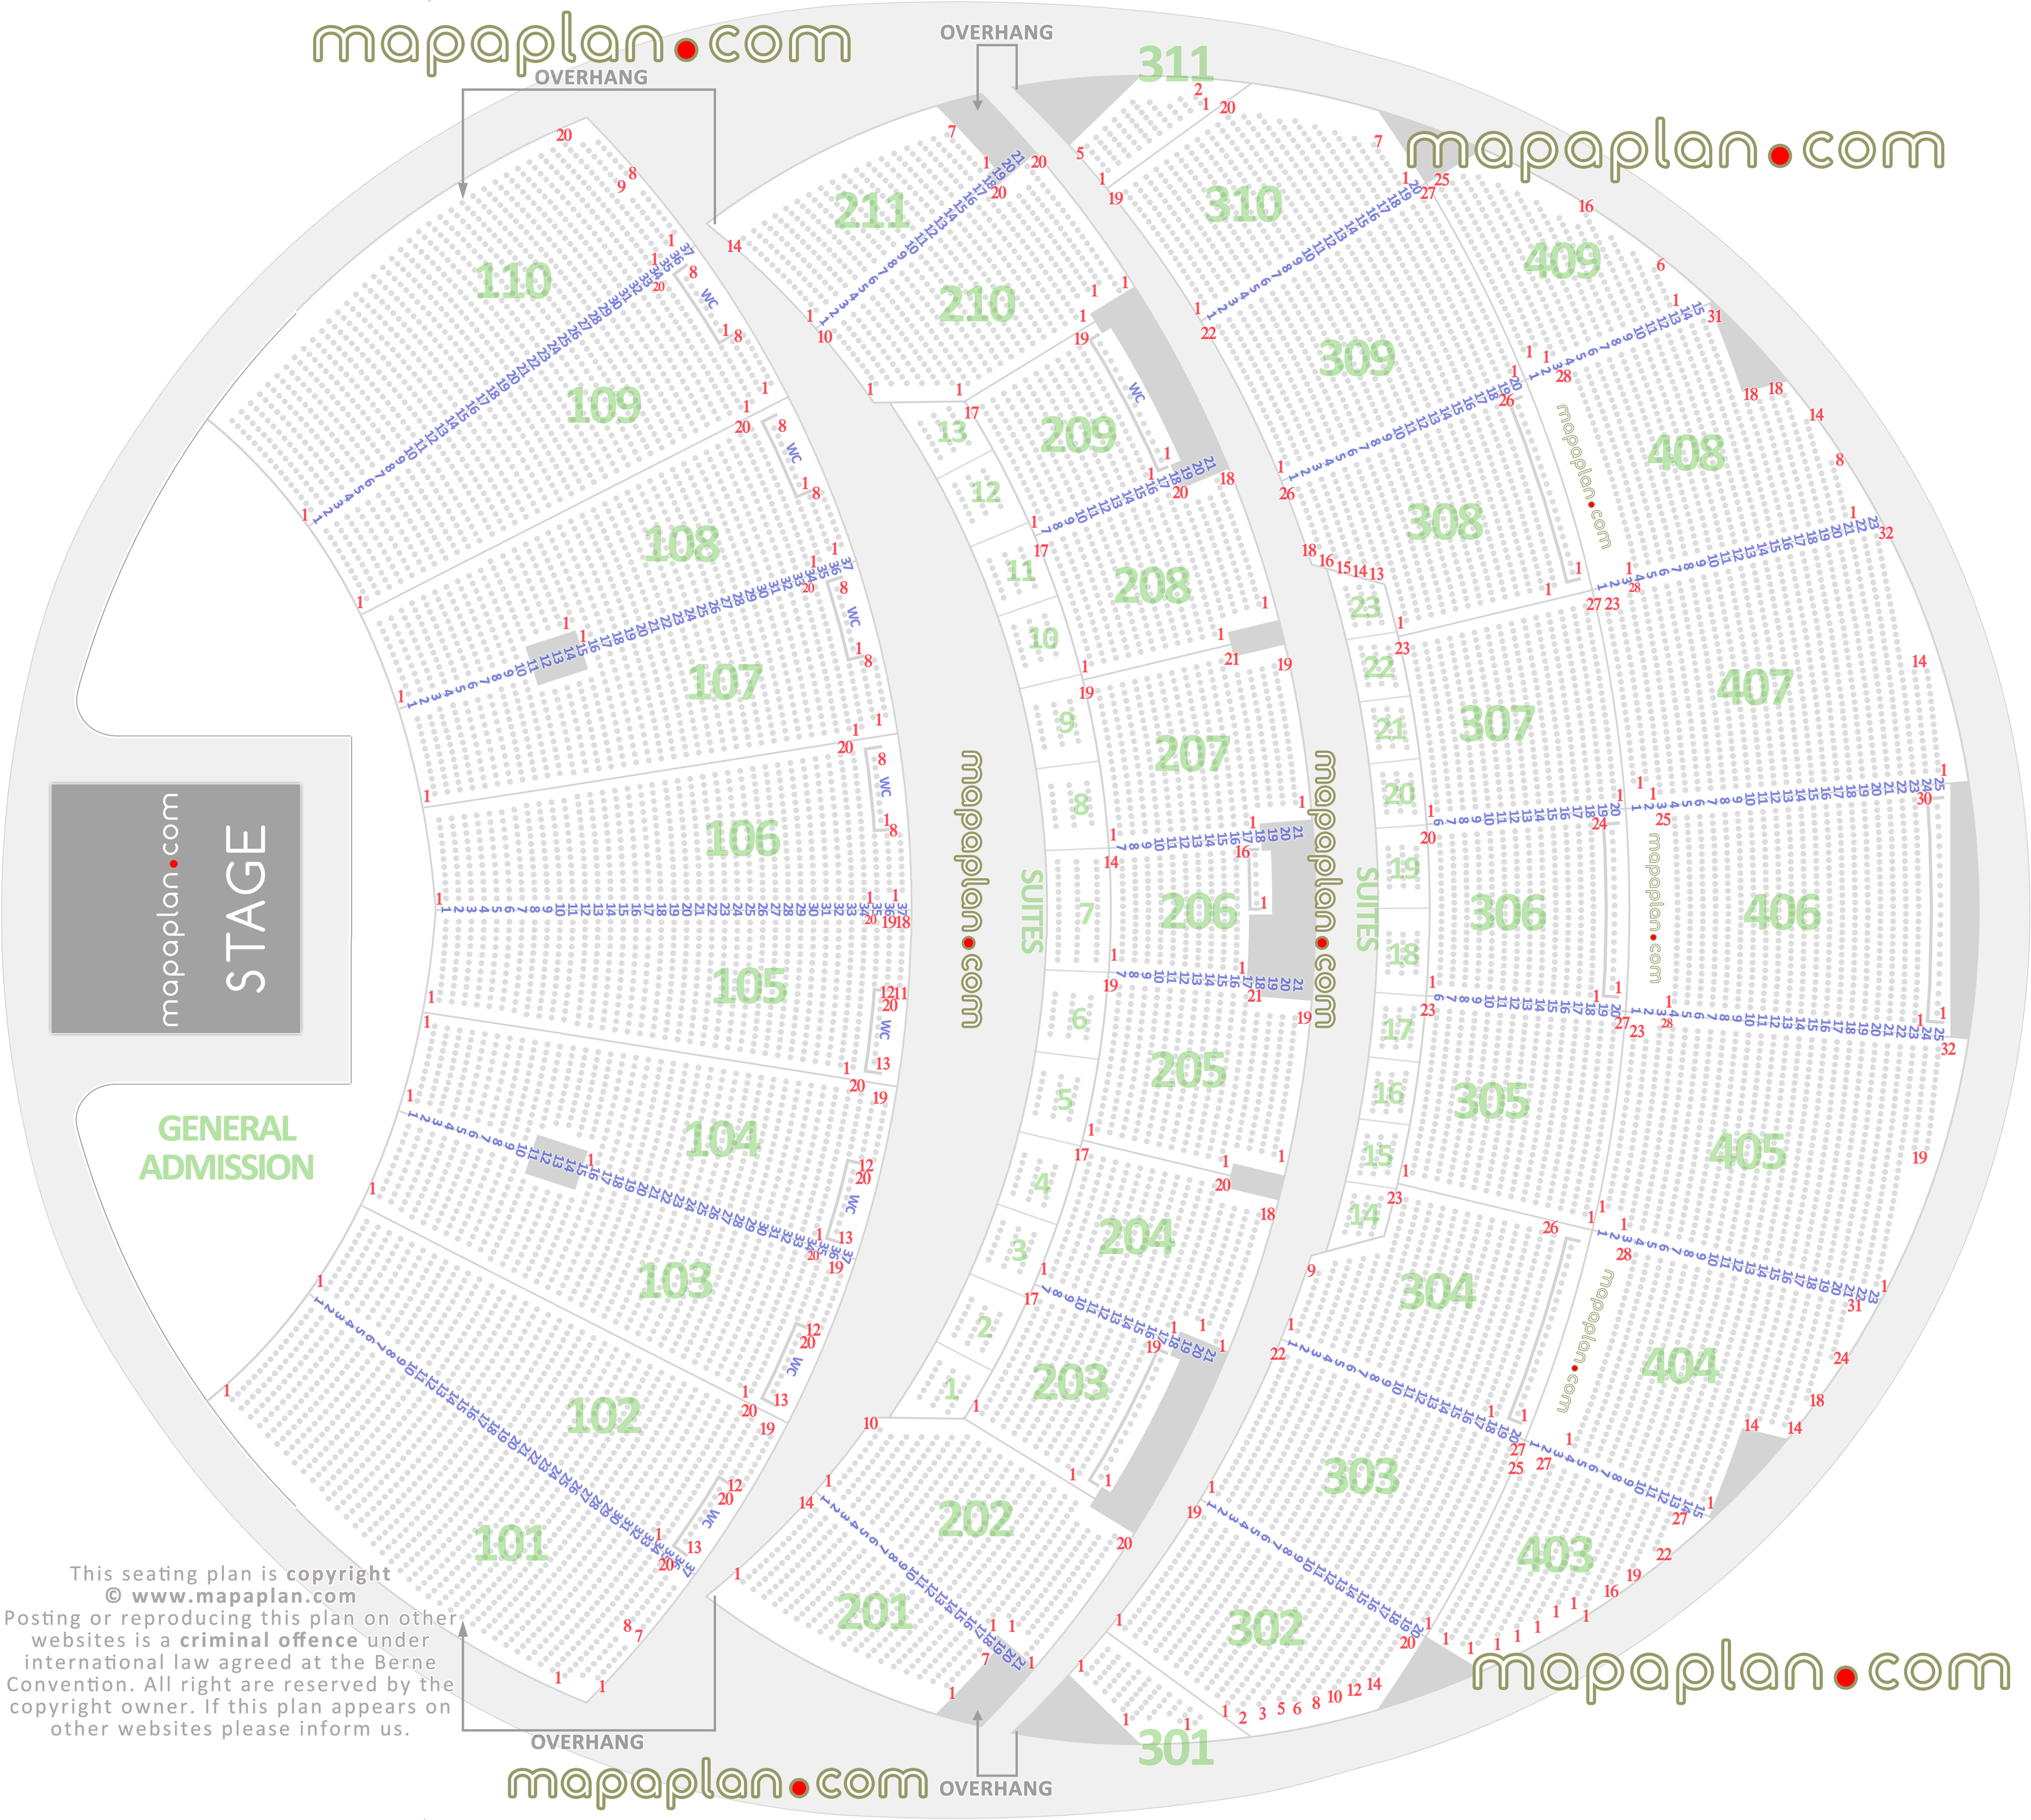 Las Vegas Sphere seat finder map find best seats fully seated concert show row numbering system seats per row individual find seat locator best interactive seat finder tool precise detailed location data